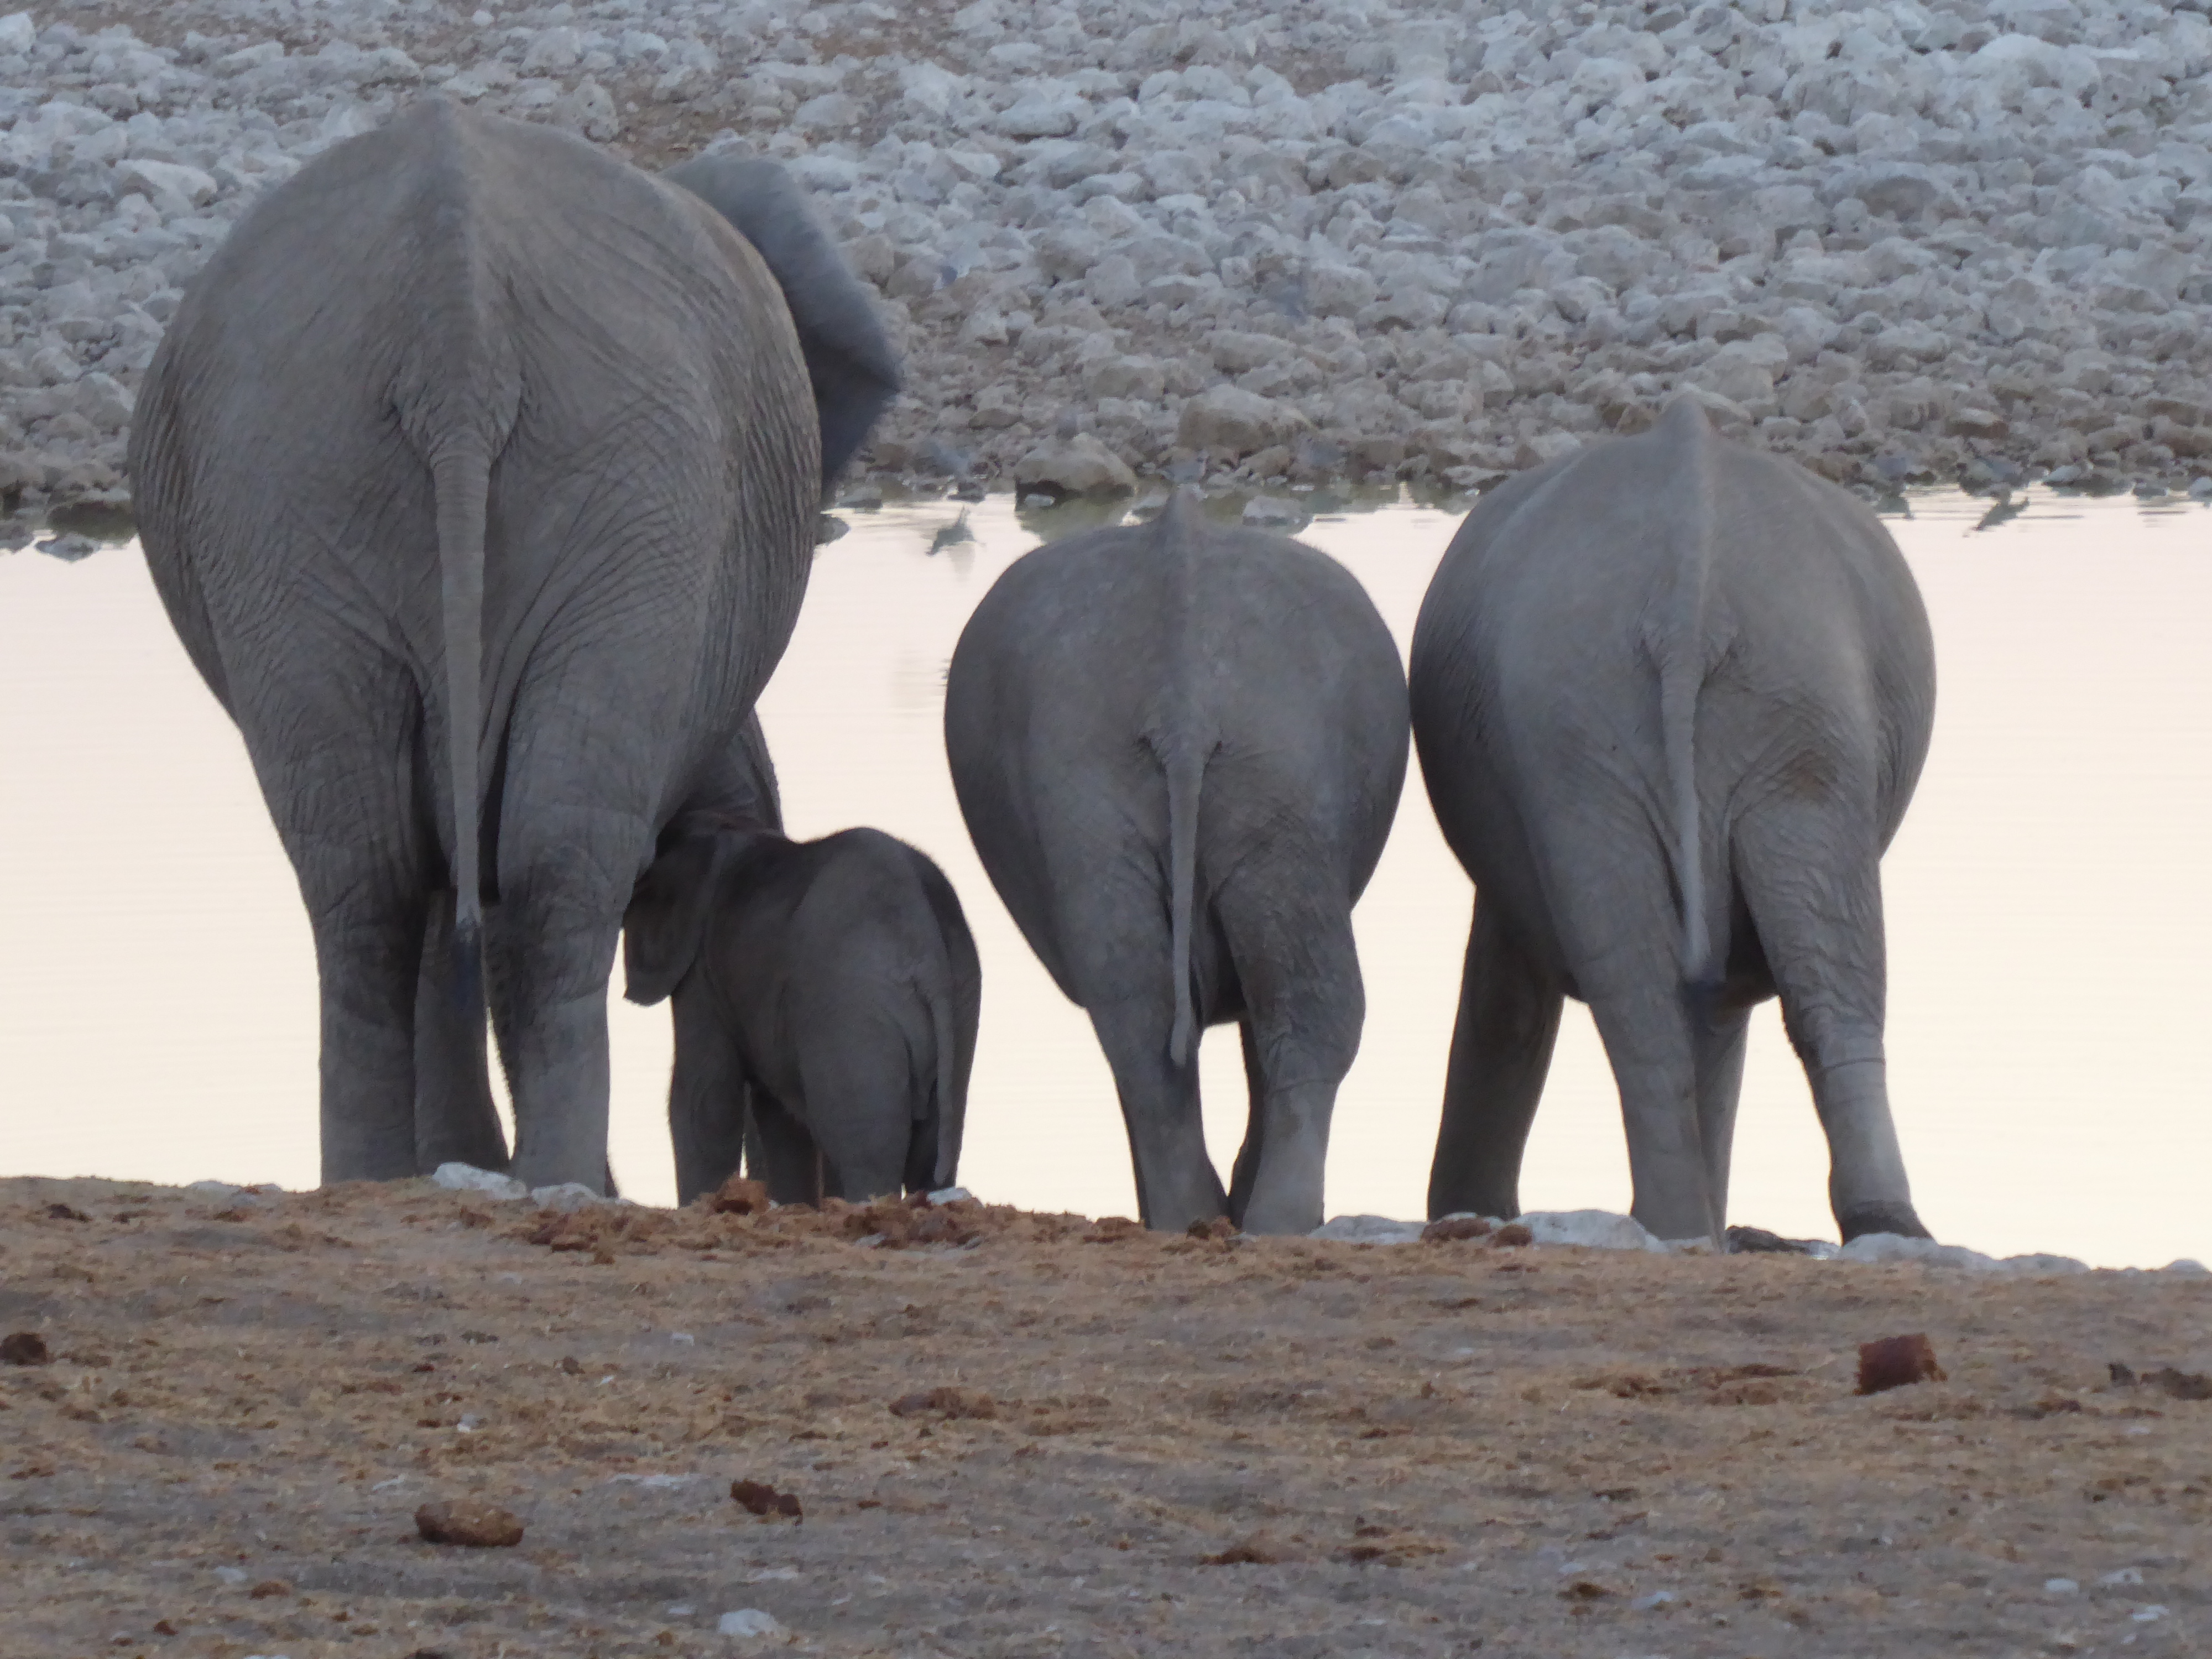 Elephant family in Etosha National Park – but the waterhole is man-made.